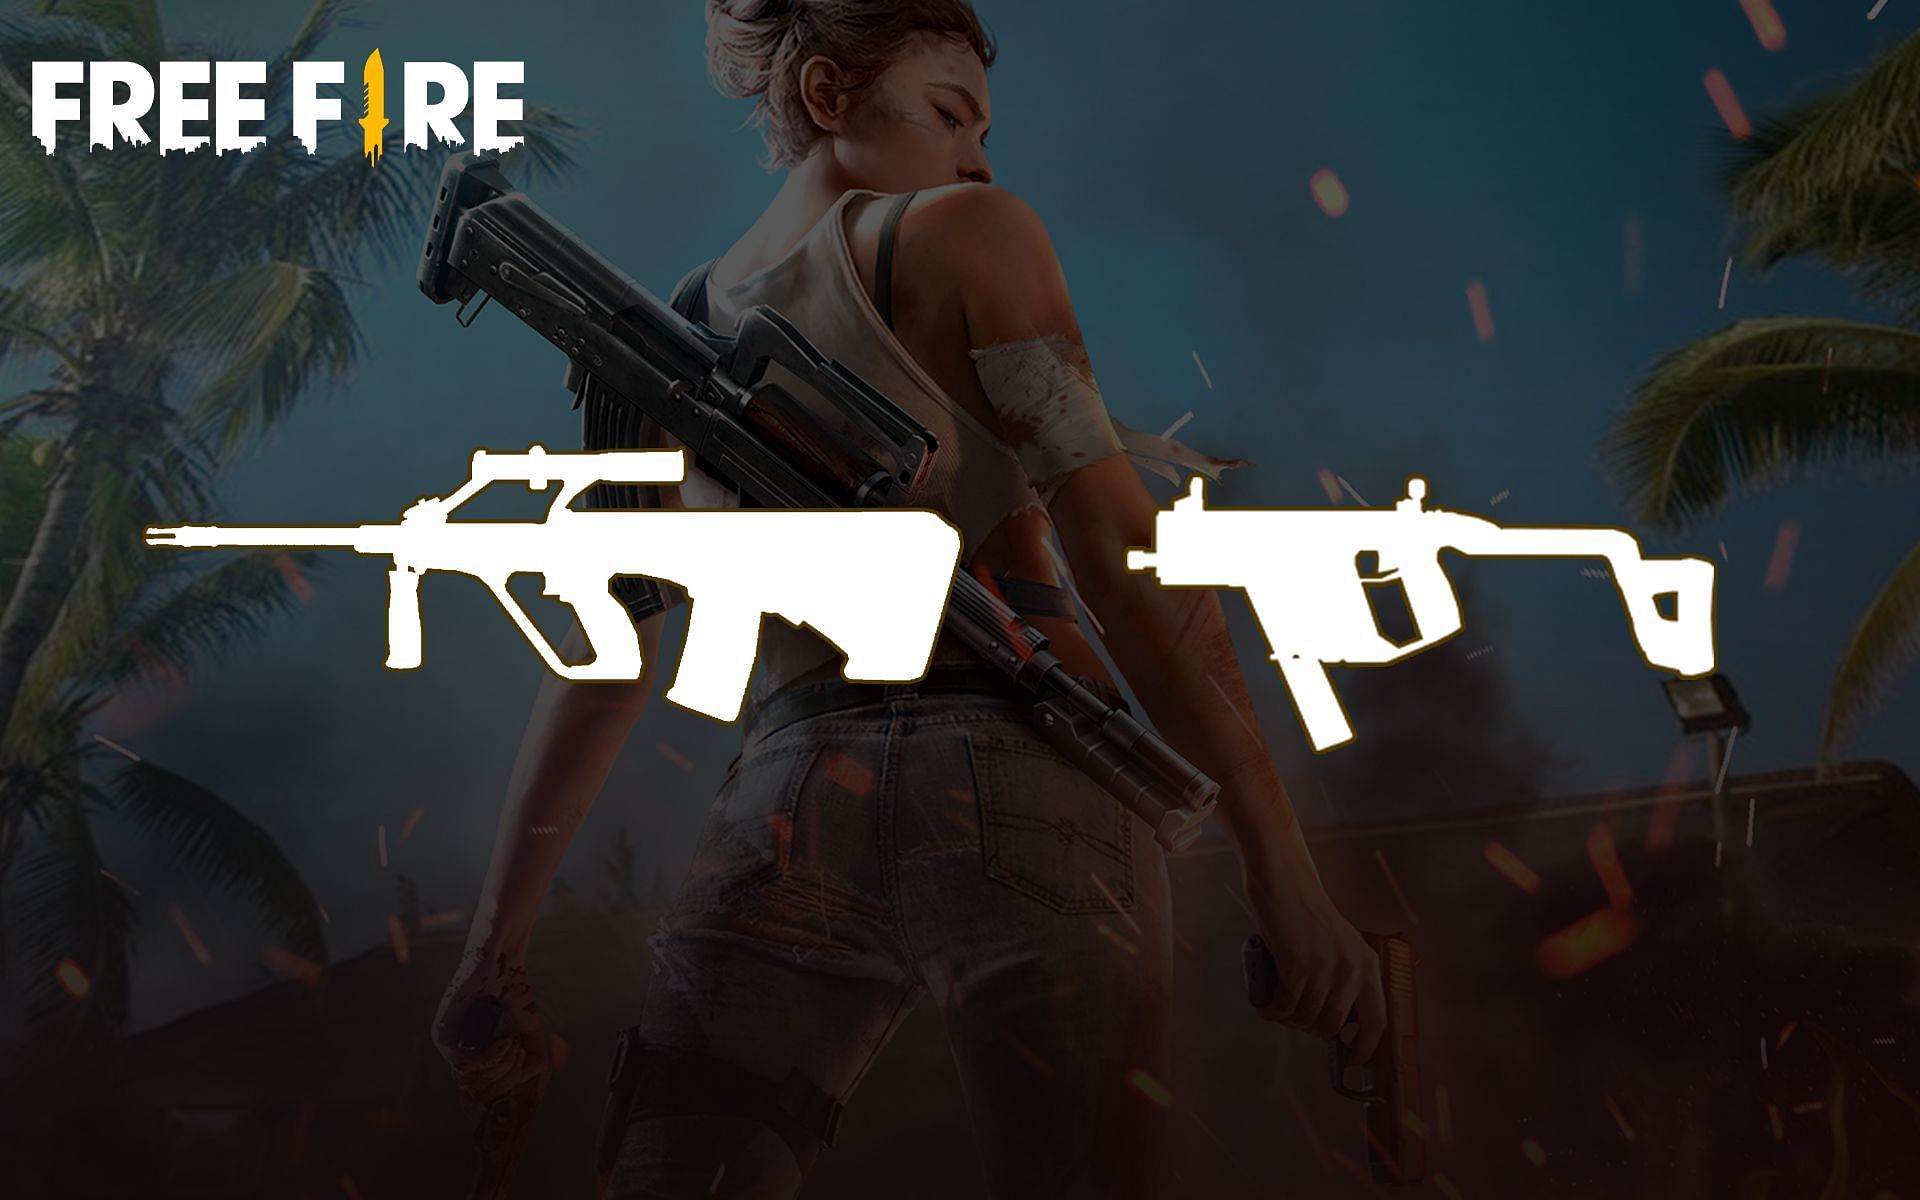 There are several guns available to users (Image via Sportskeeda/Free Fire)